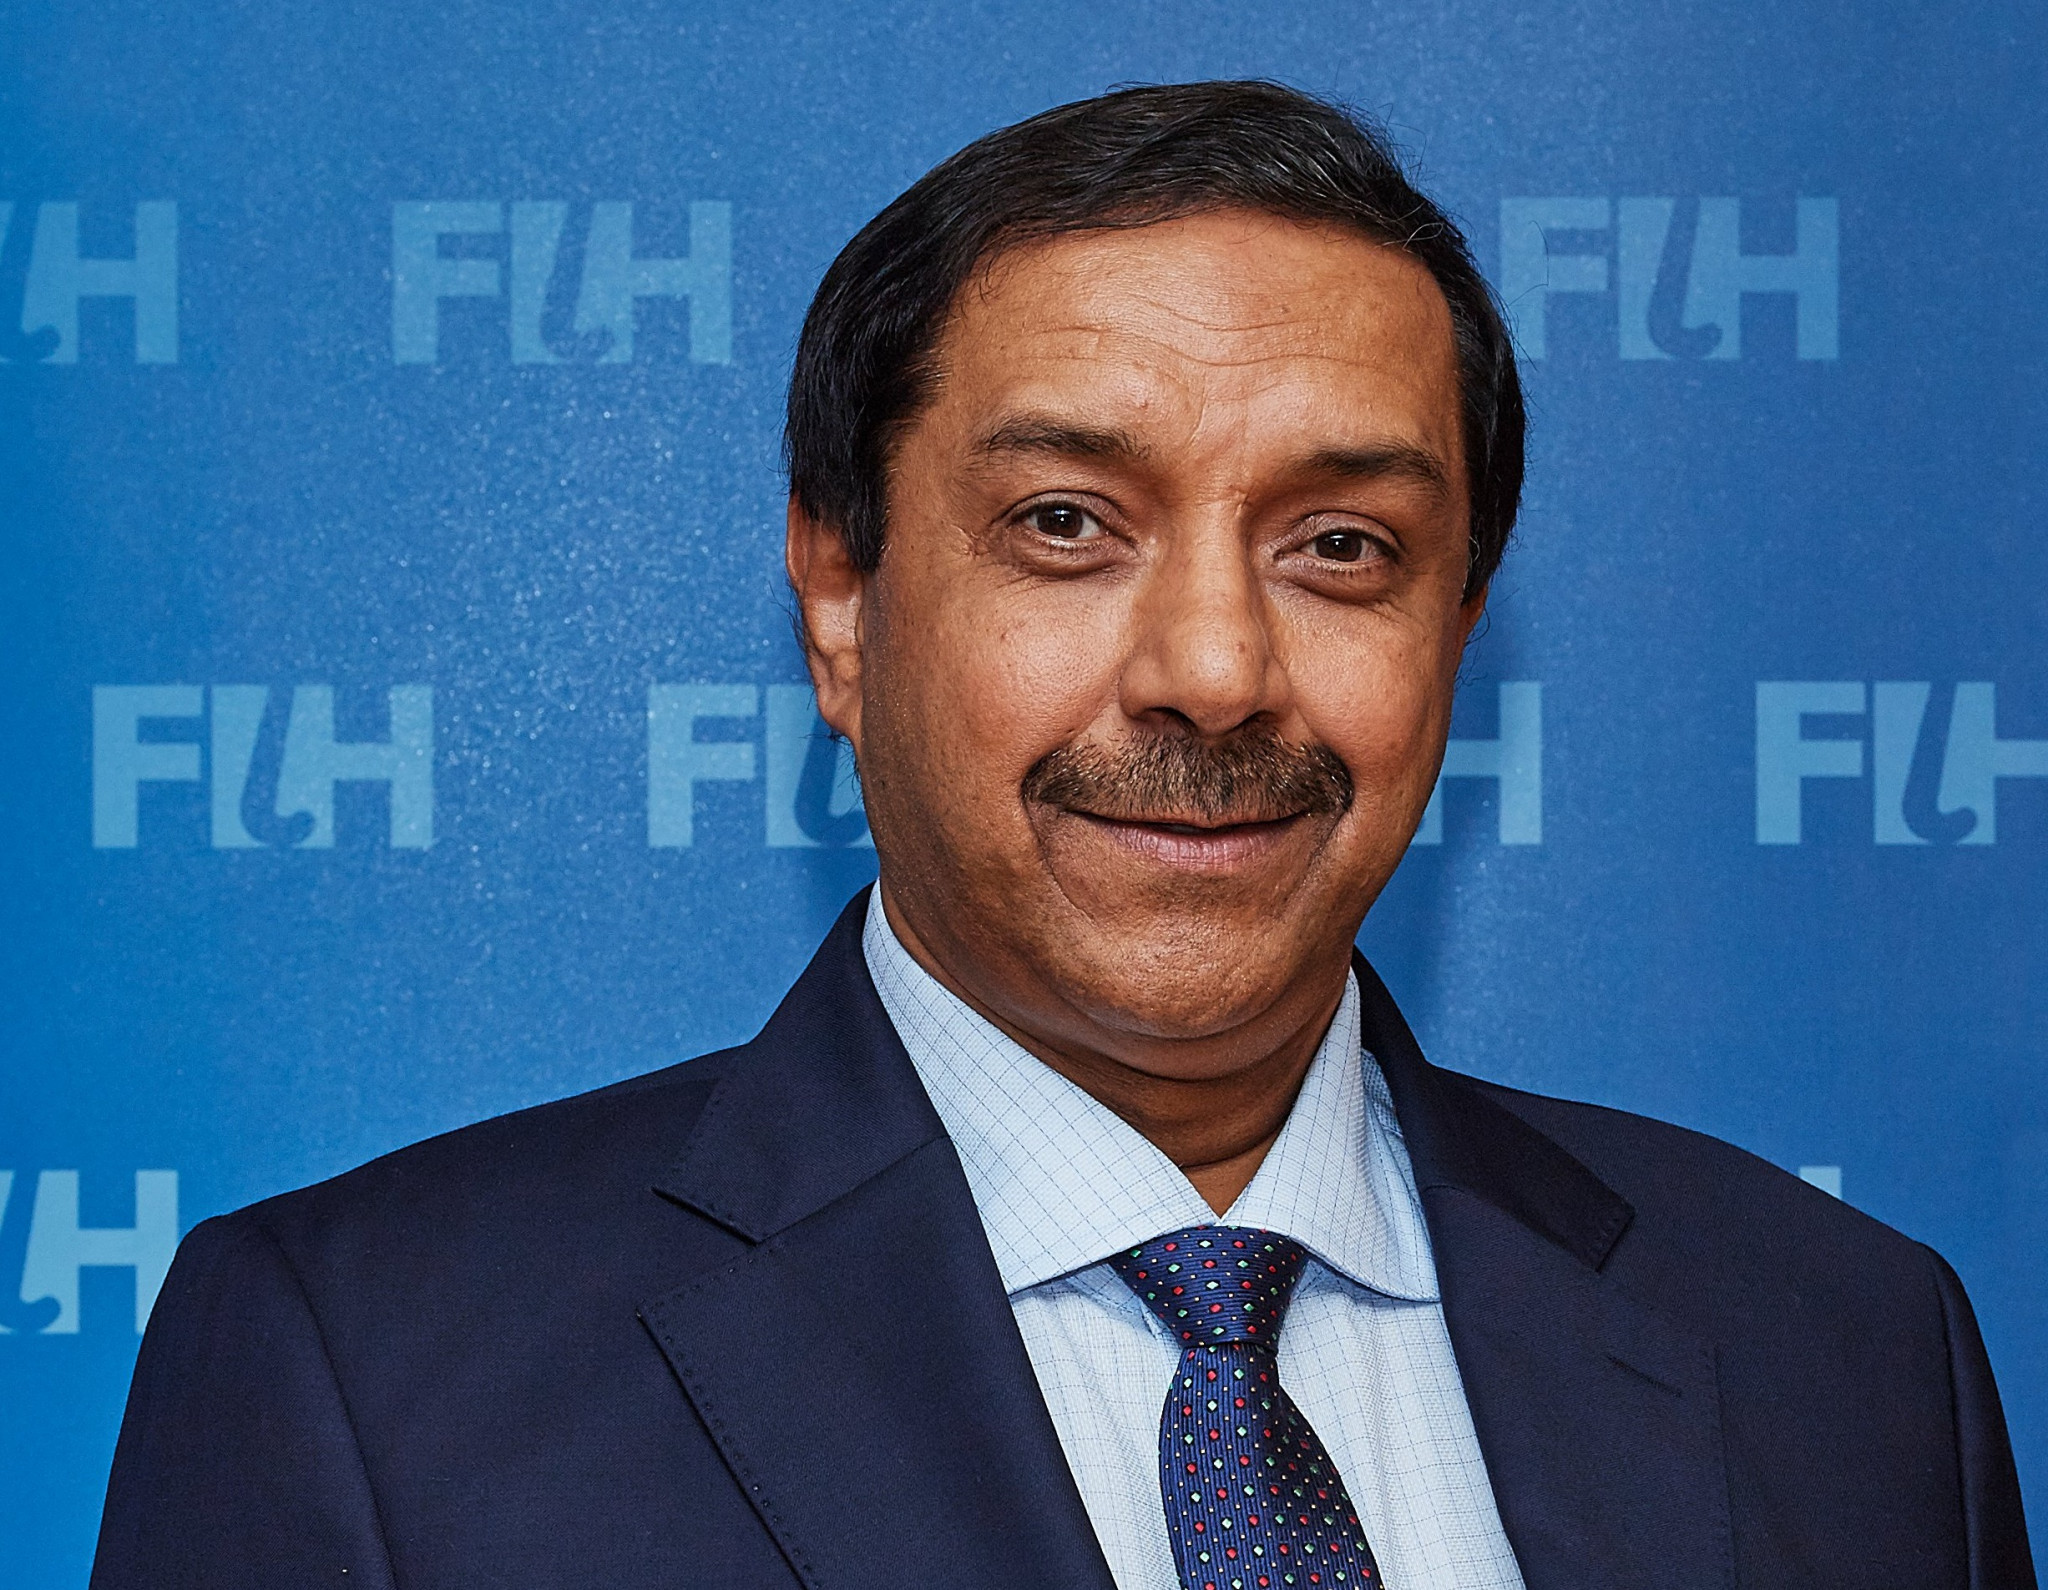 FIH President Tayyab Ikram opened the governing body's first Executive Board meeting of the year in Odisha as it stages the Men's World Cup ©FIH